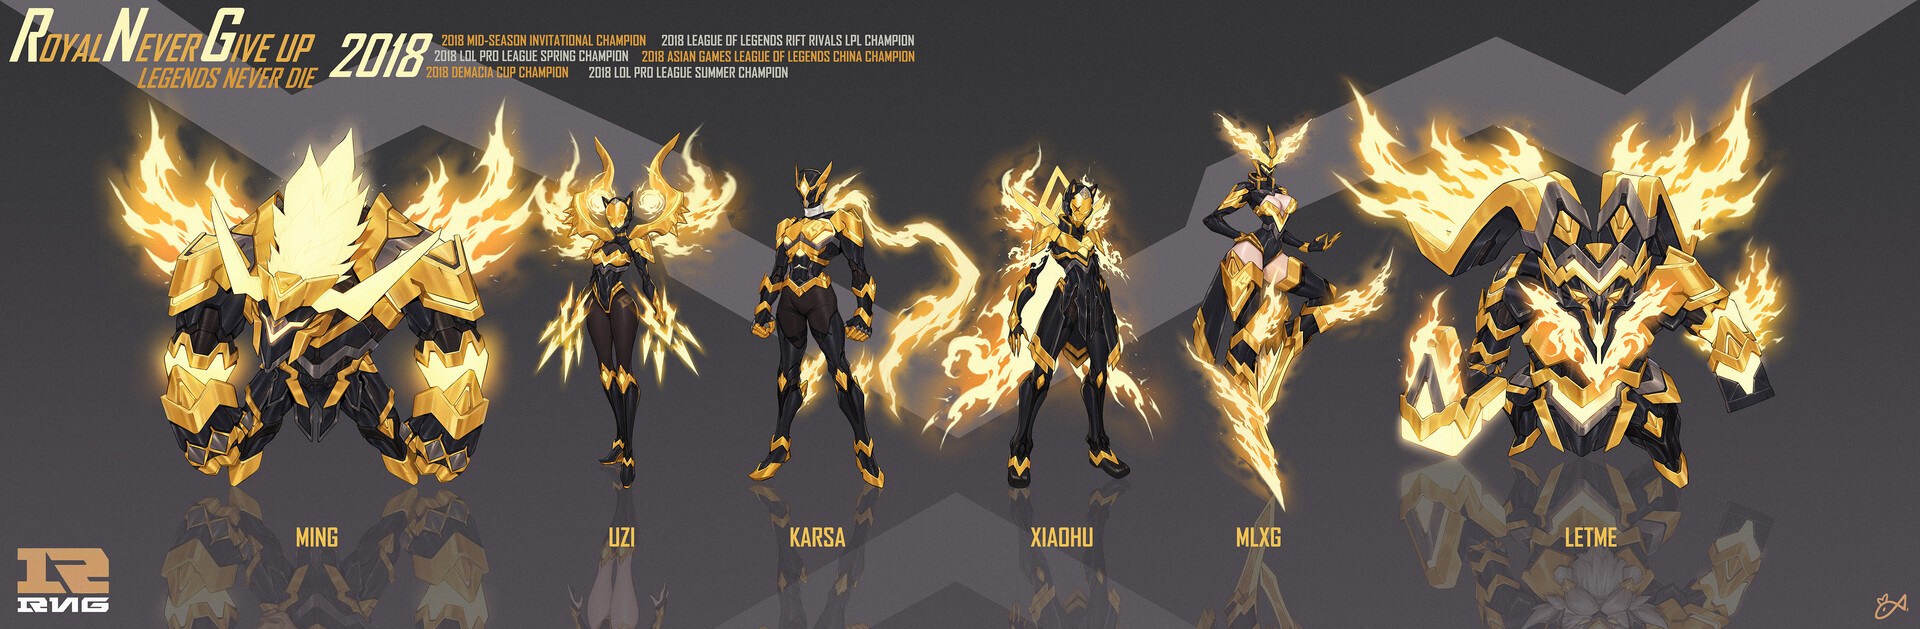 ♥『League of Legends』♥ — FPX World Skins Concept Art by luoyu liu